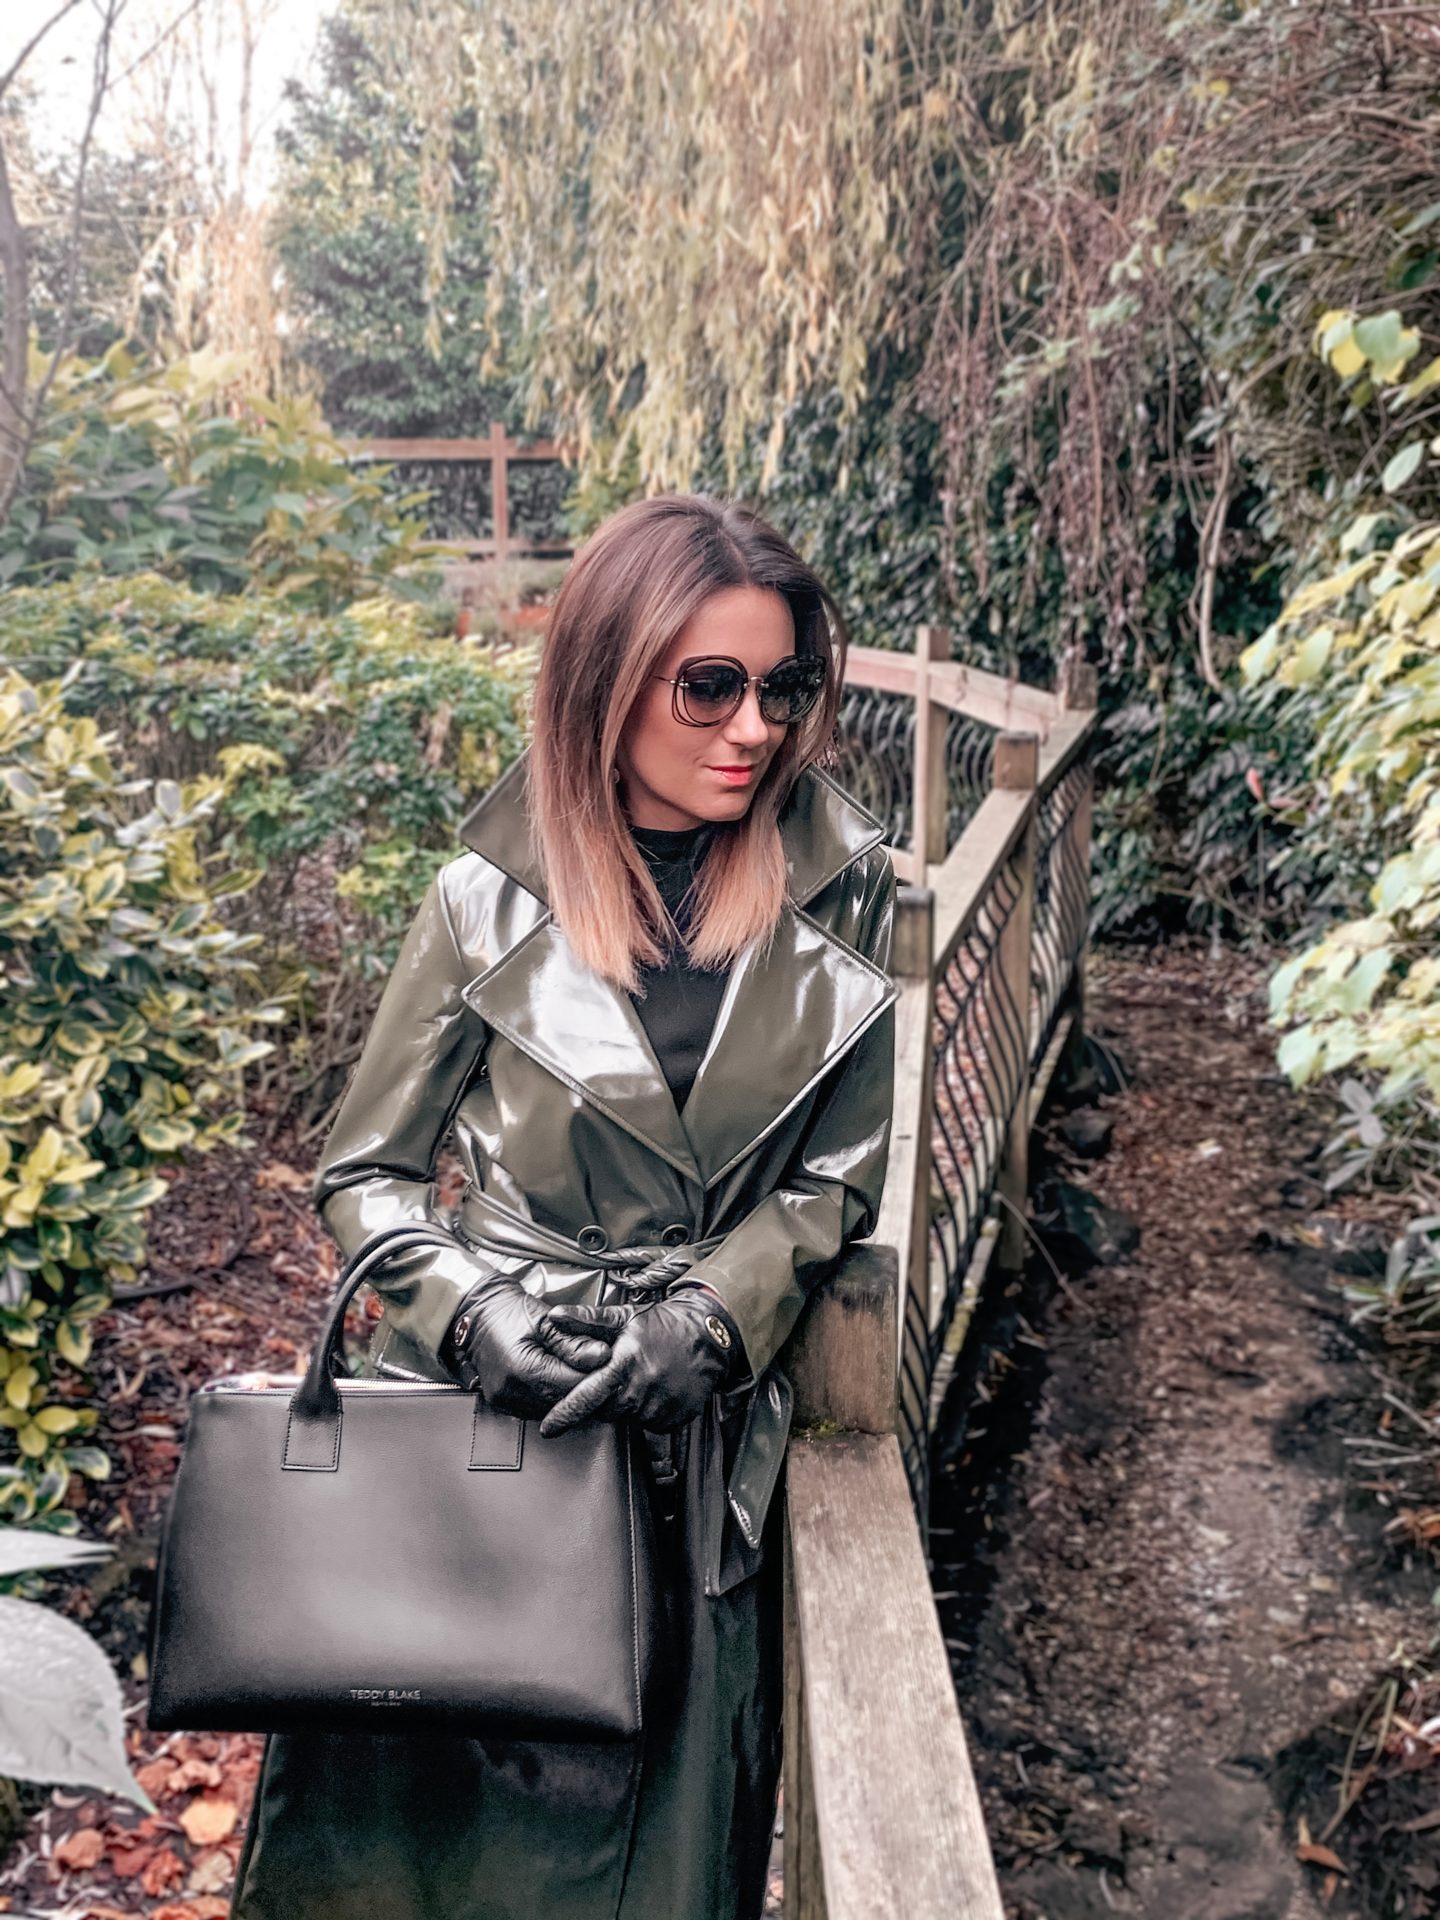 ASOS Urbancode high shine PU belted trench coat in khaki | Mulberry gloves | Miu Miu sunglasses | Teddy Blake Bag |Dune Over the Knee Boots